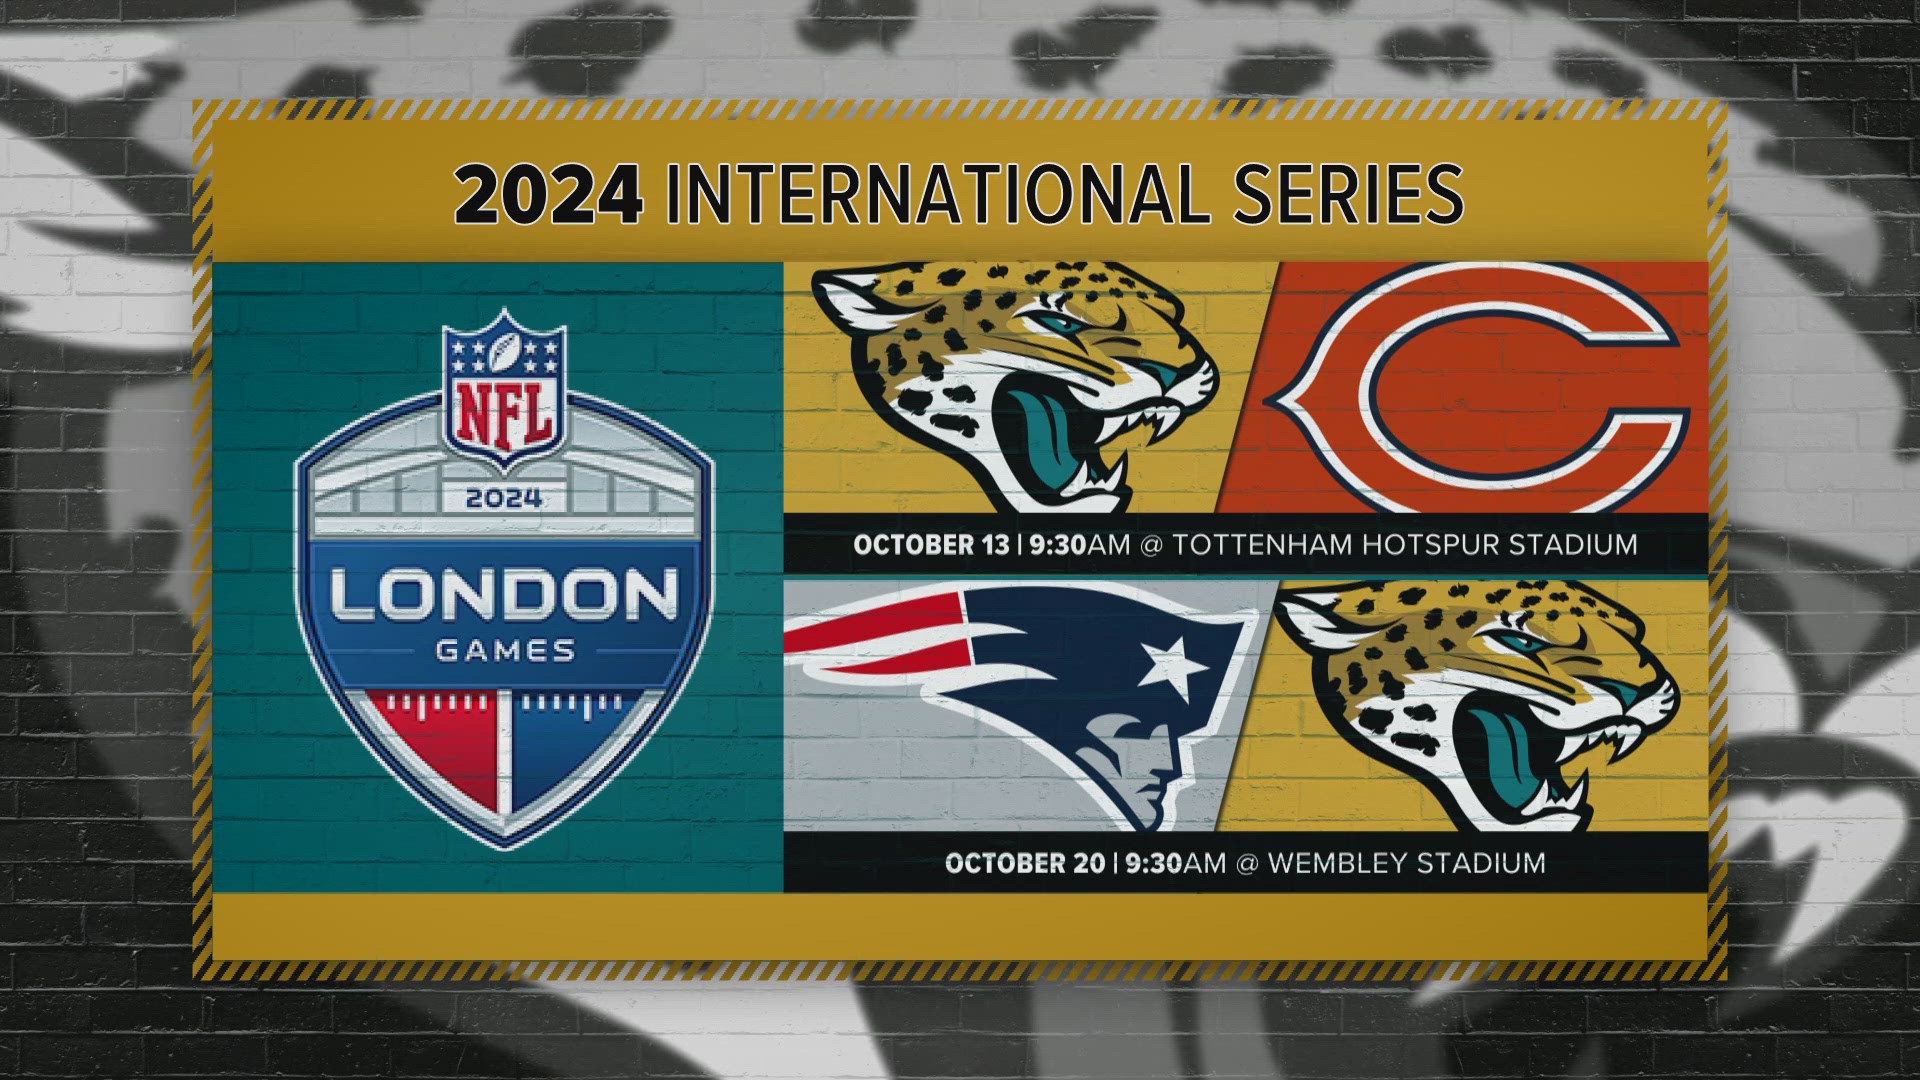 The Jaguars will play the Chicago Bears on Oct. 13 at 9:30 a.m., then the New England Patriots on Oct. 20 at 9:30 a.m.